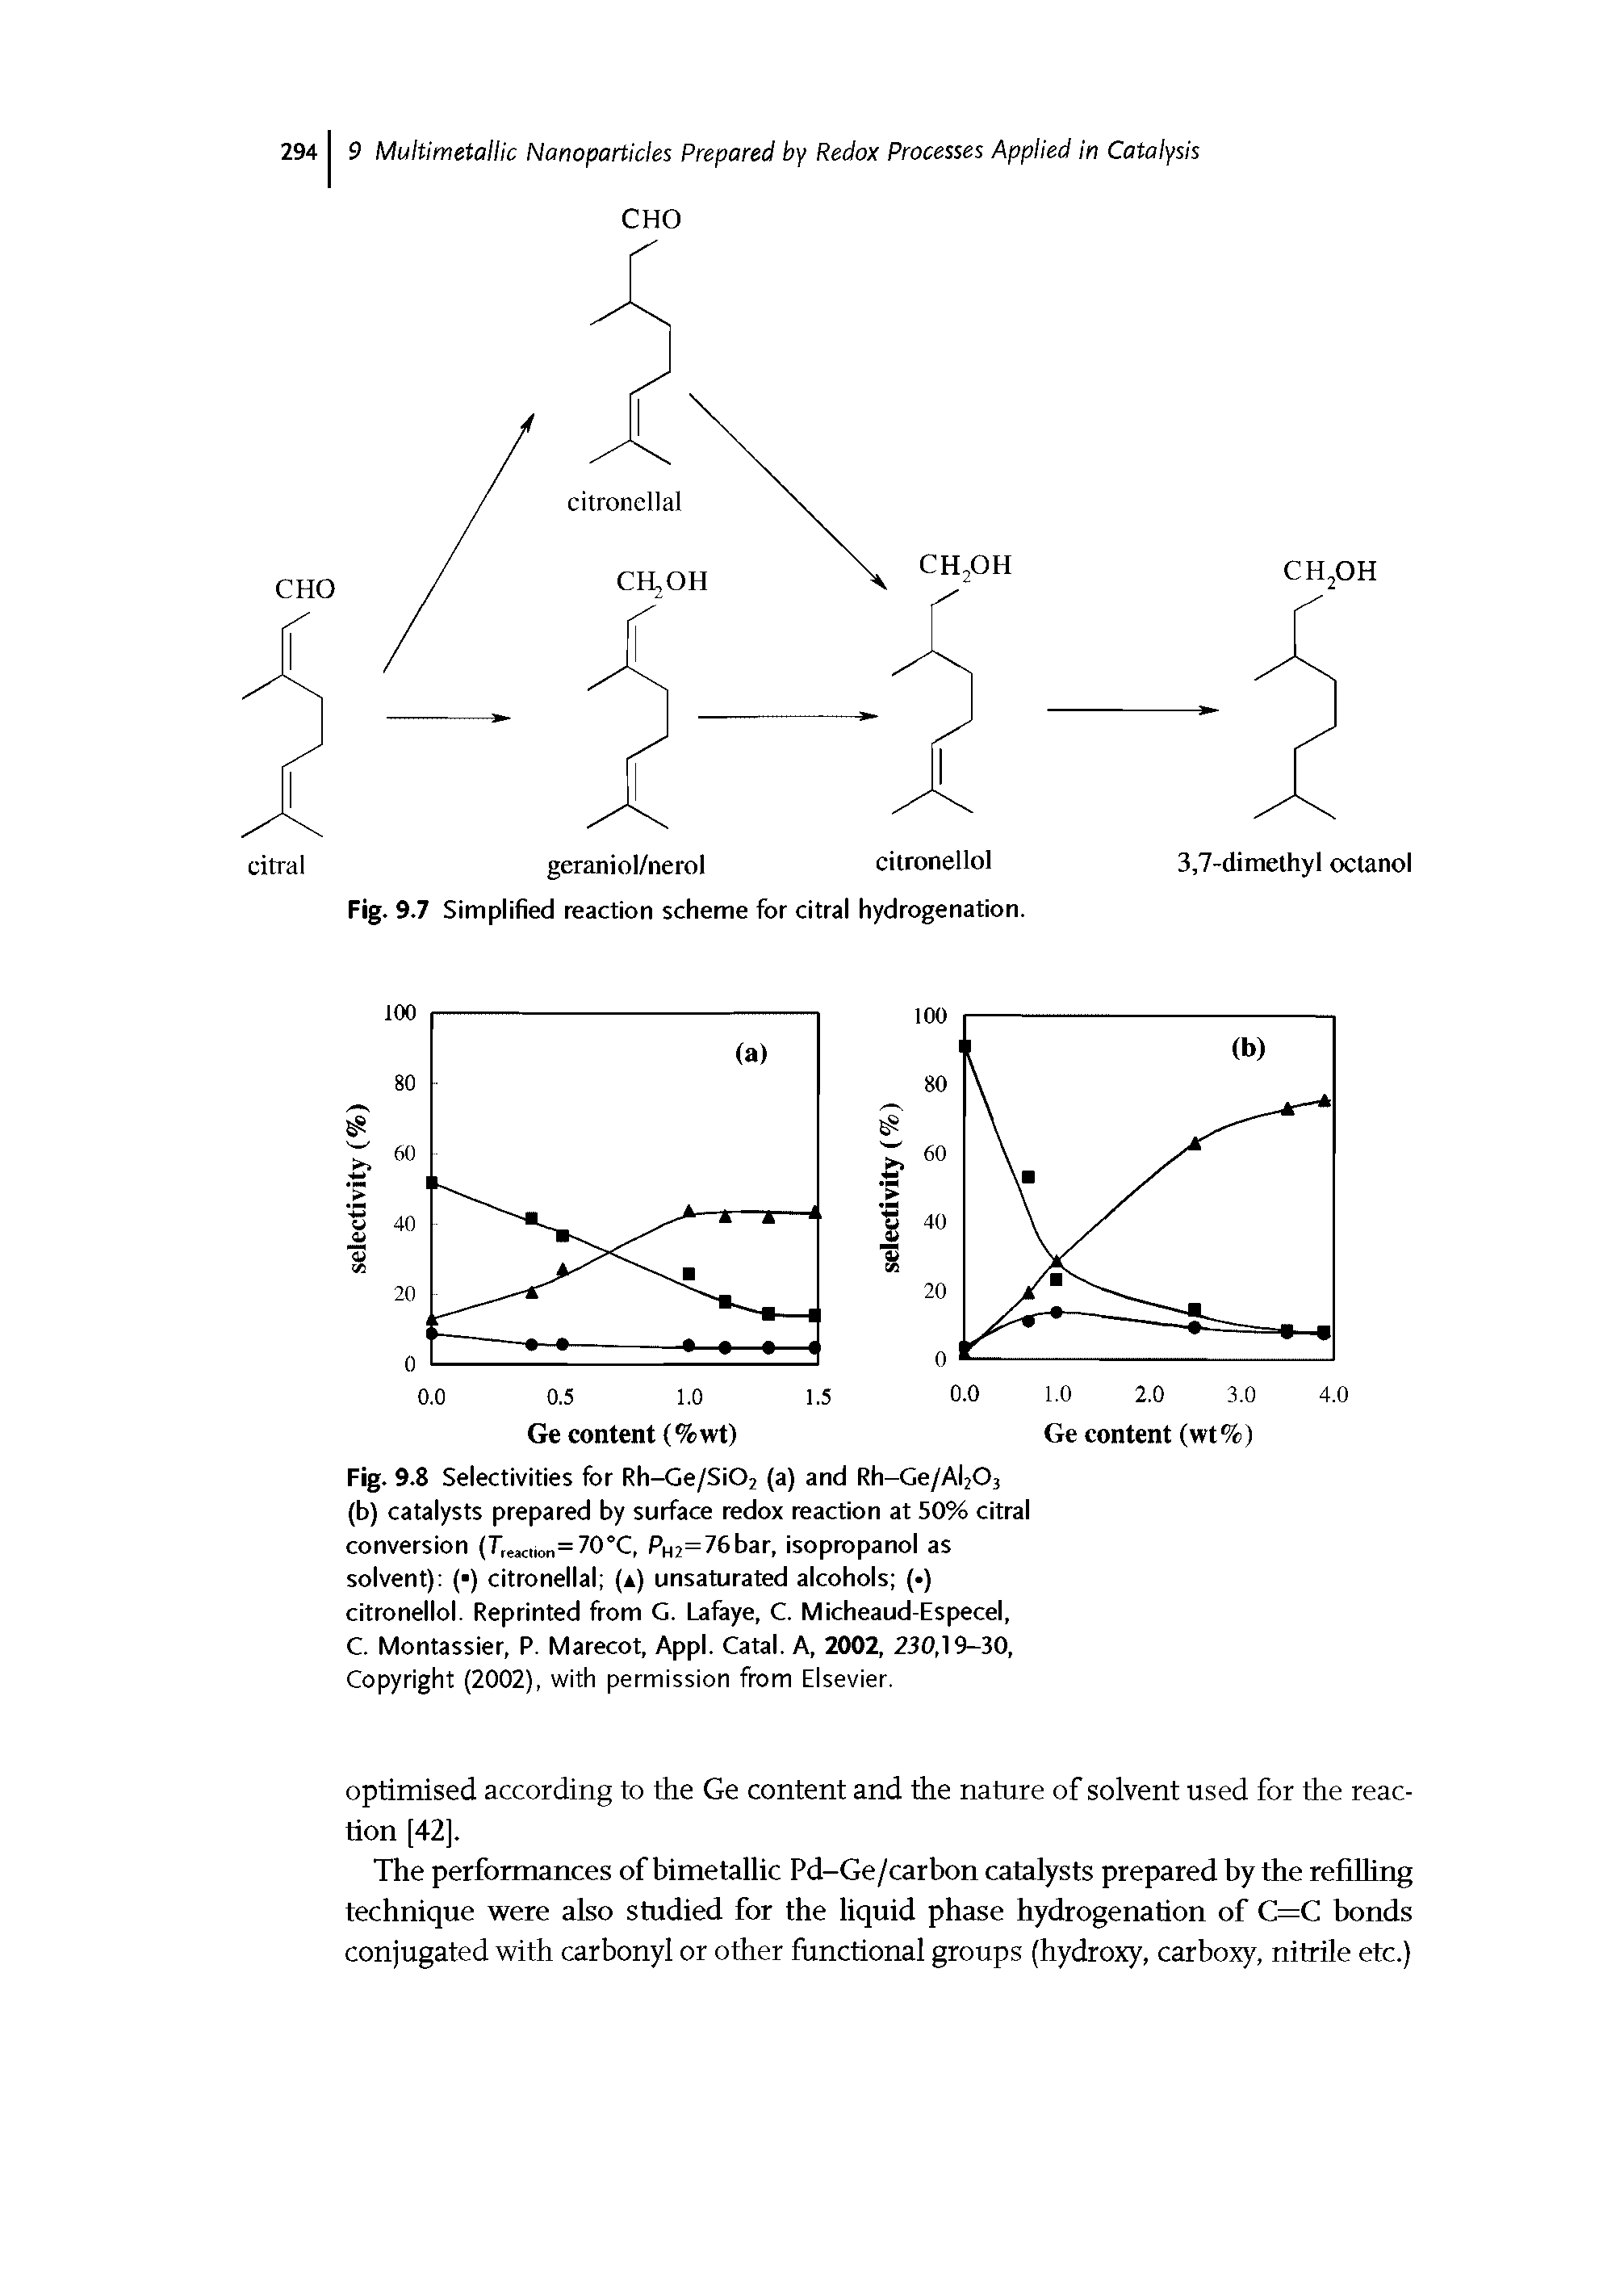 Fig. 9.8 Selectivities for Rh-Ce/Si02 (a) and Rh-Ge/Al203 (b) catalysts prepared by surface redox reaction at 50% citral conversion (T,e,cion=70°C, PH2=76bar, isopropanol as solvent) ( ) citronellal (a) unsaturated alcohols ( ) citronellol. Reprinted from G. Lafaye, C. Micheaud-Especel, C. Montassier, P. Marecot, Appl. Catal. A, 2002, 230,19-30, Copyright (2002), with permission from Elsevier.